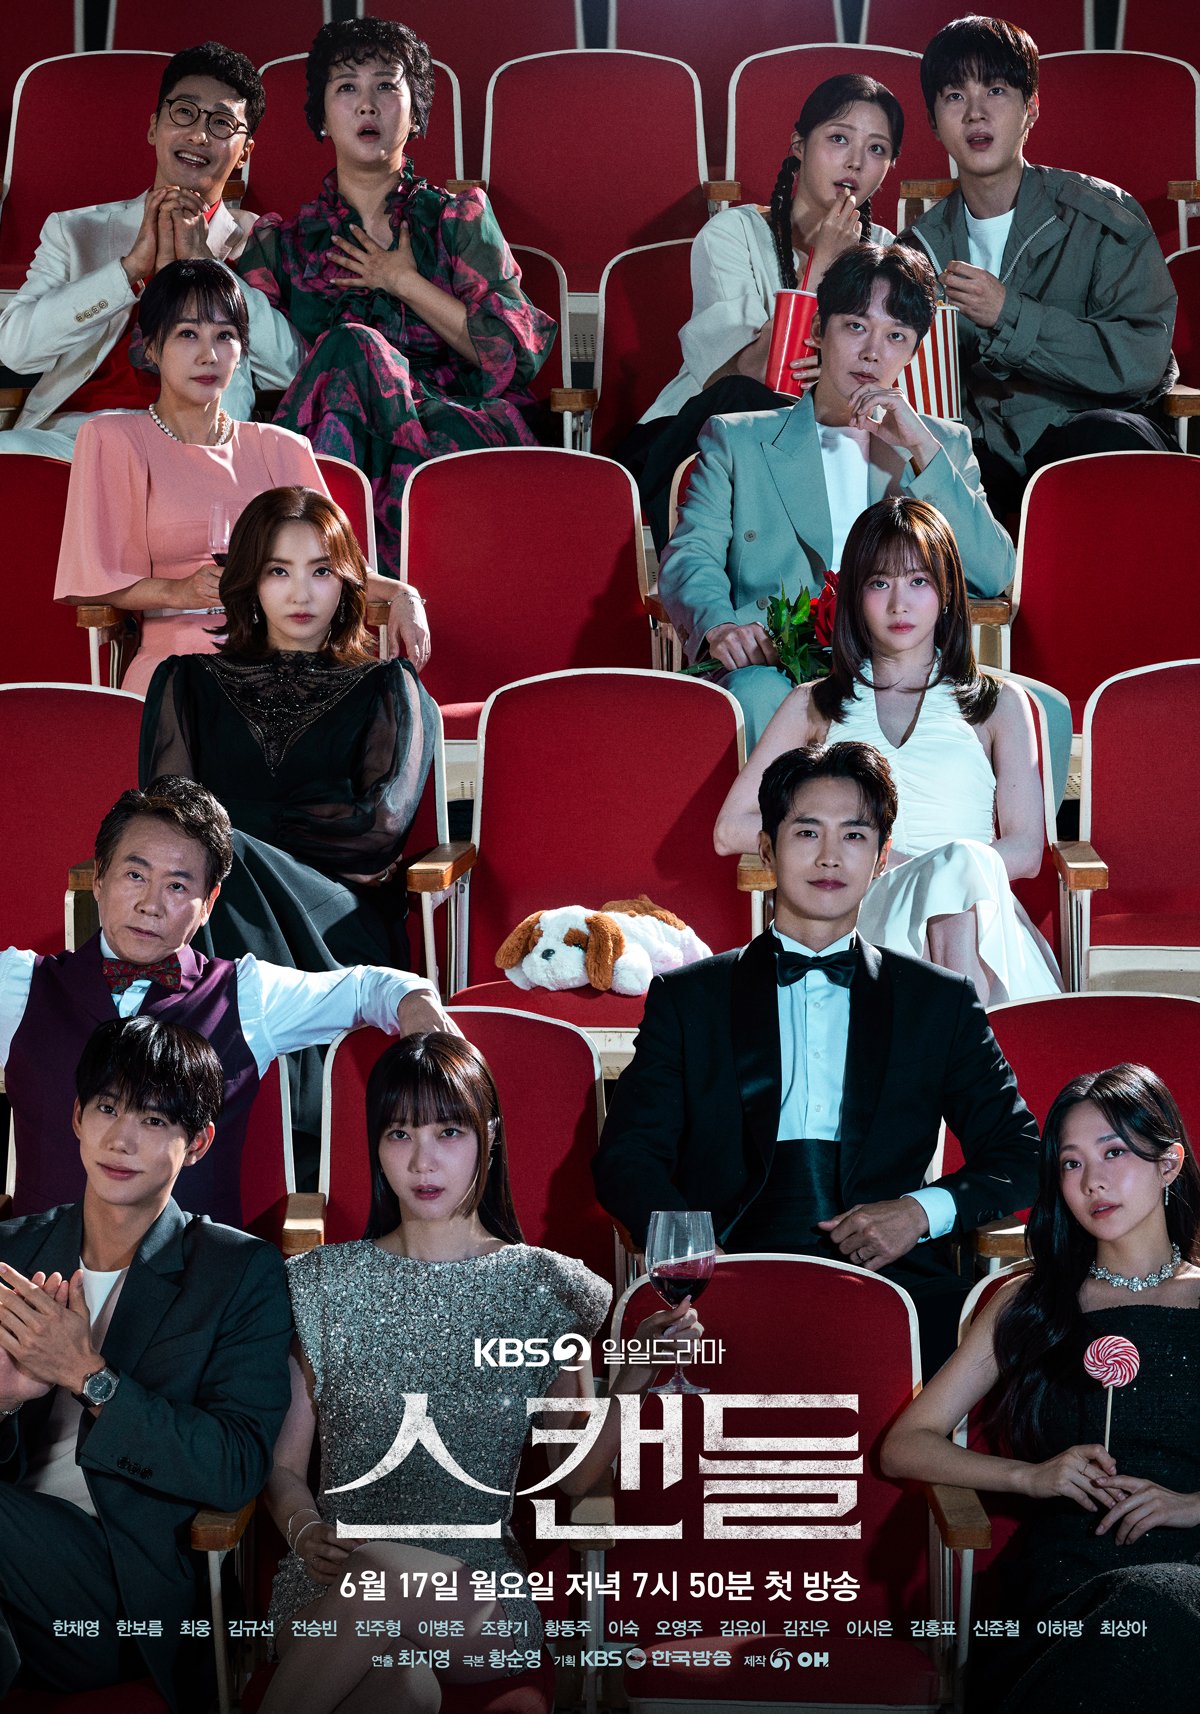 Han Chae Young, Han Bo Reum, Choi Woong, And More Sit Down For A Movie Premiere In 